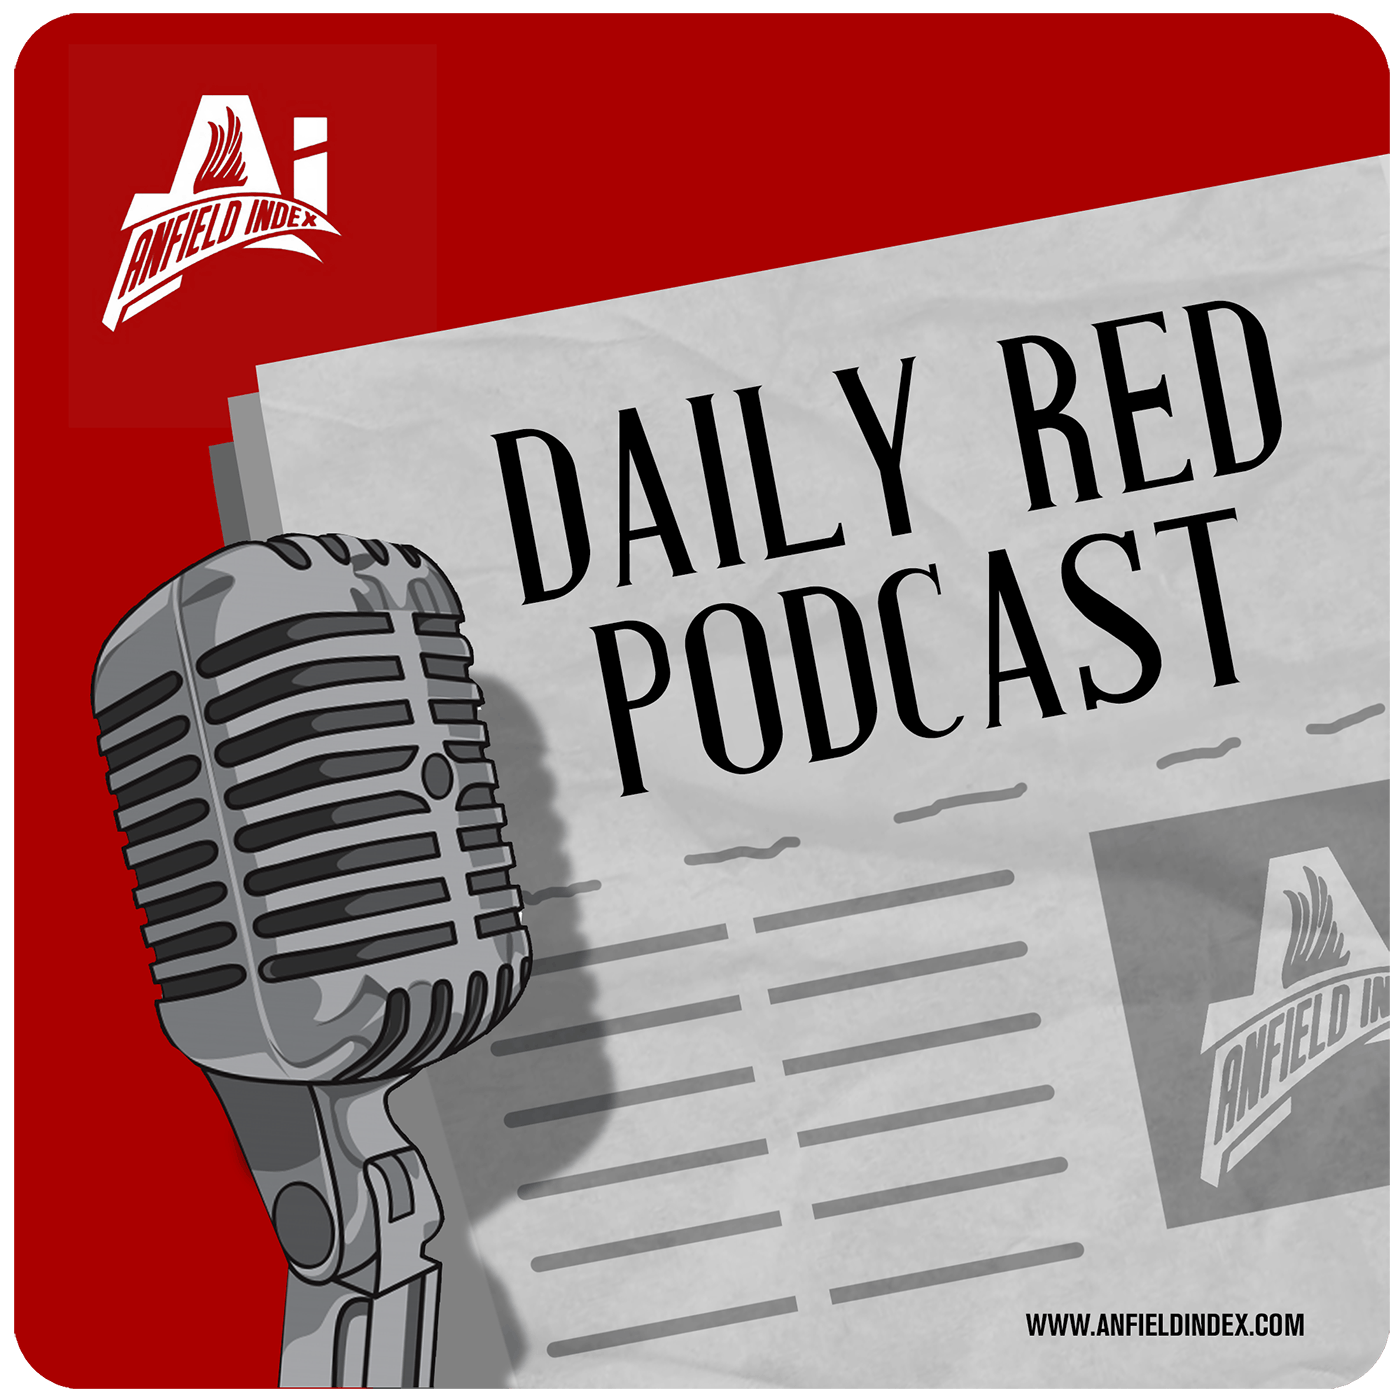 The Mo Successor: Daily Red Podcast